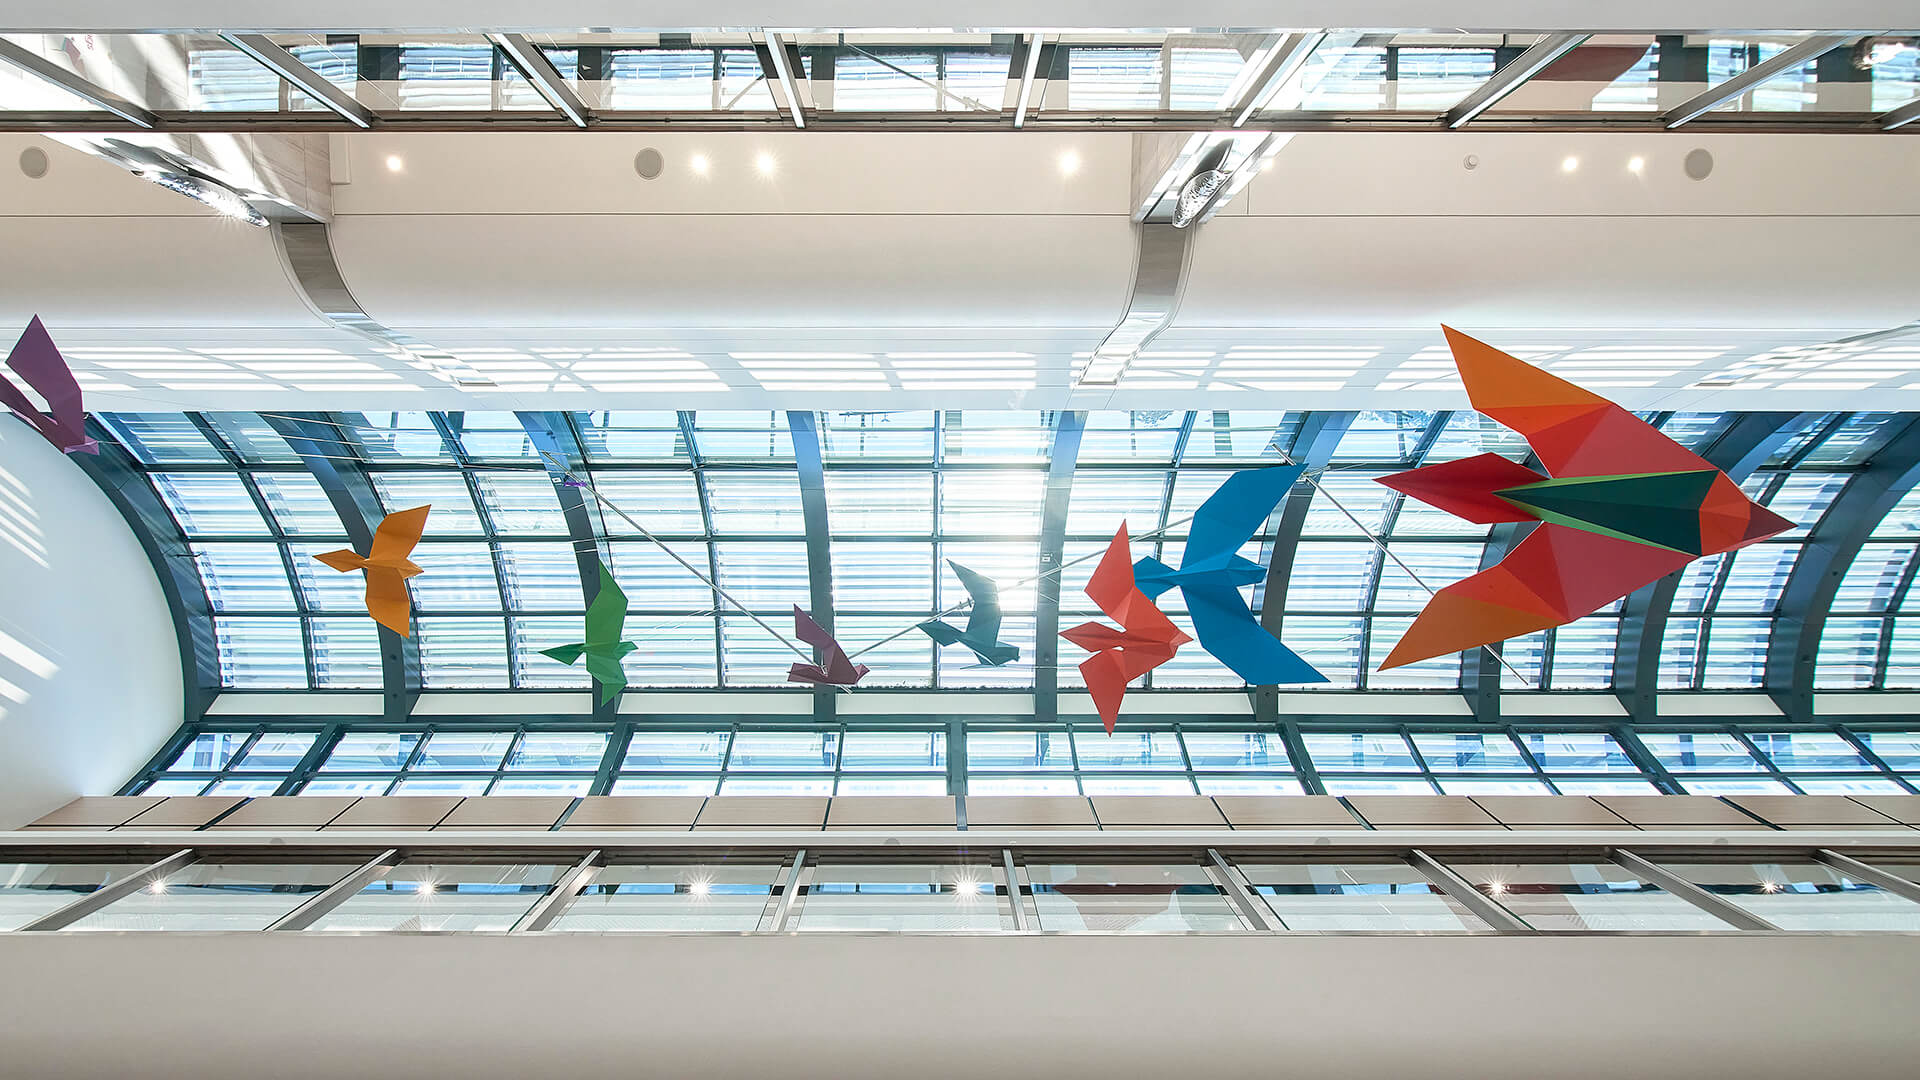 a VANDAL experiential brand activation featuring giant origami birds suspended from the ceiling of Macquarie Center